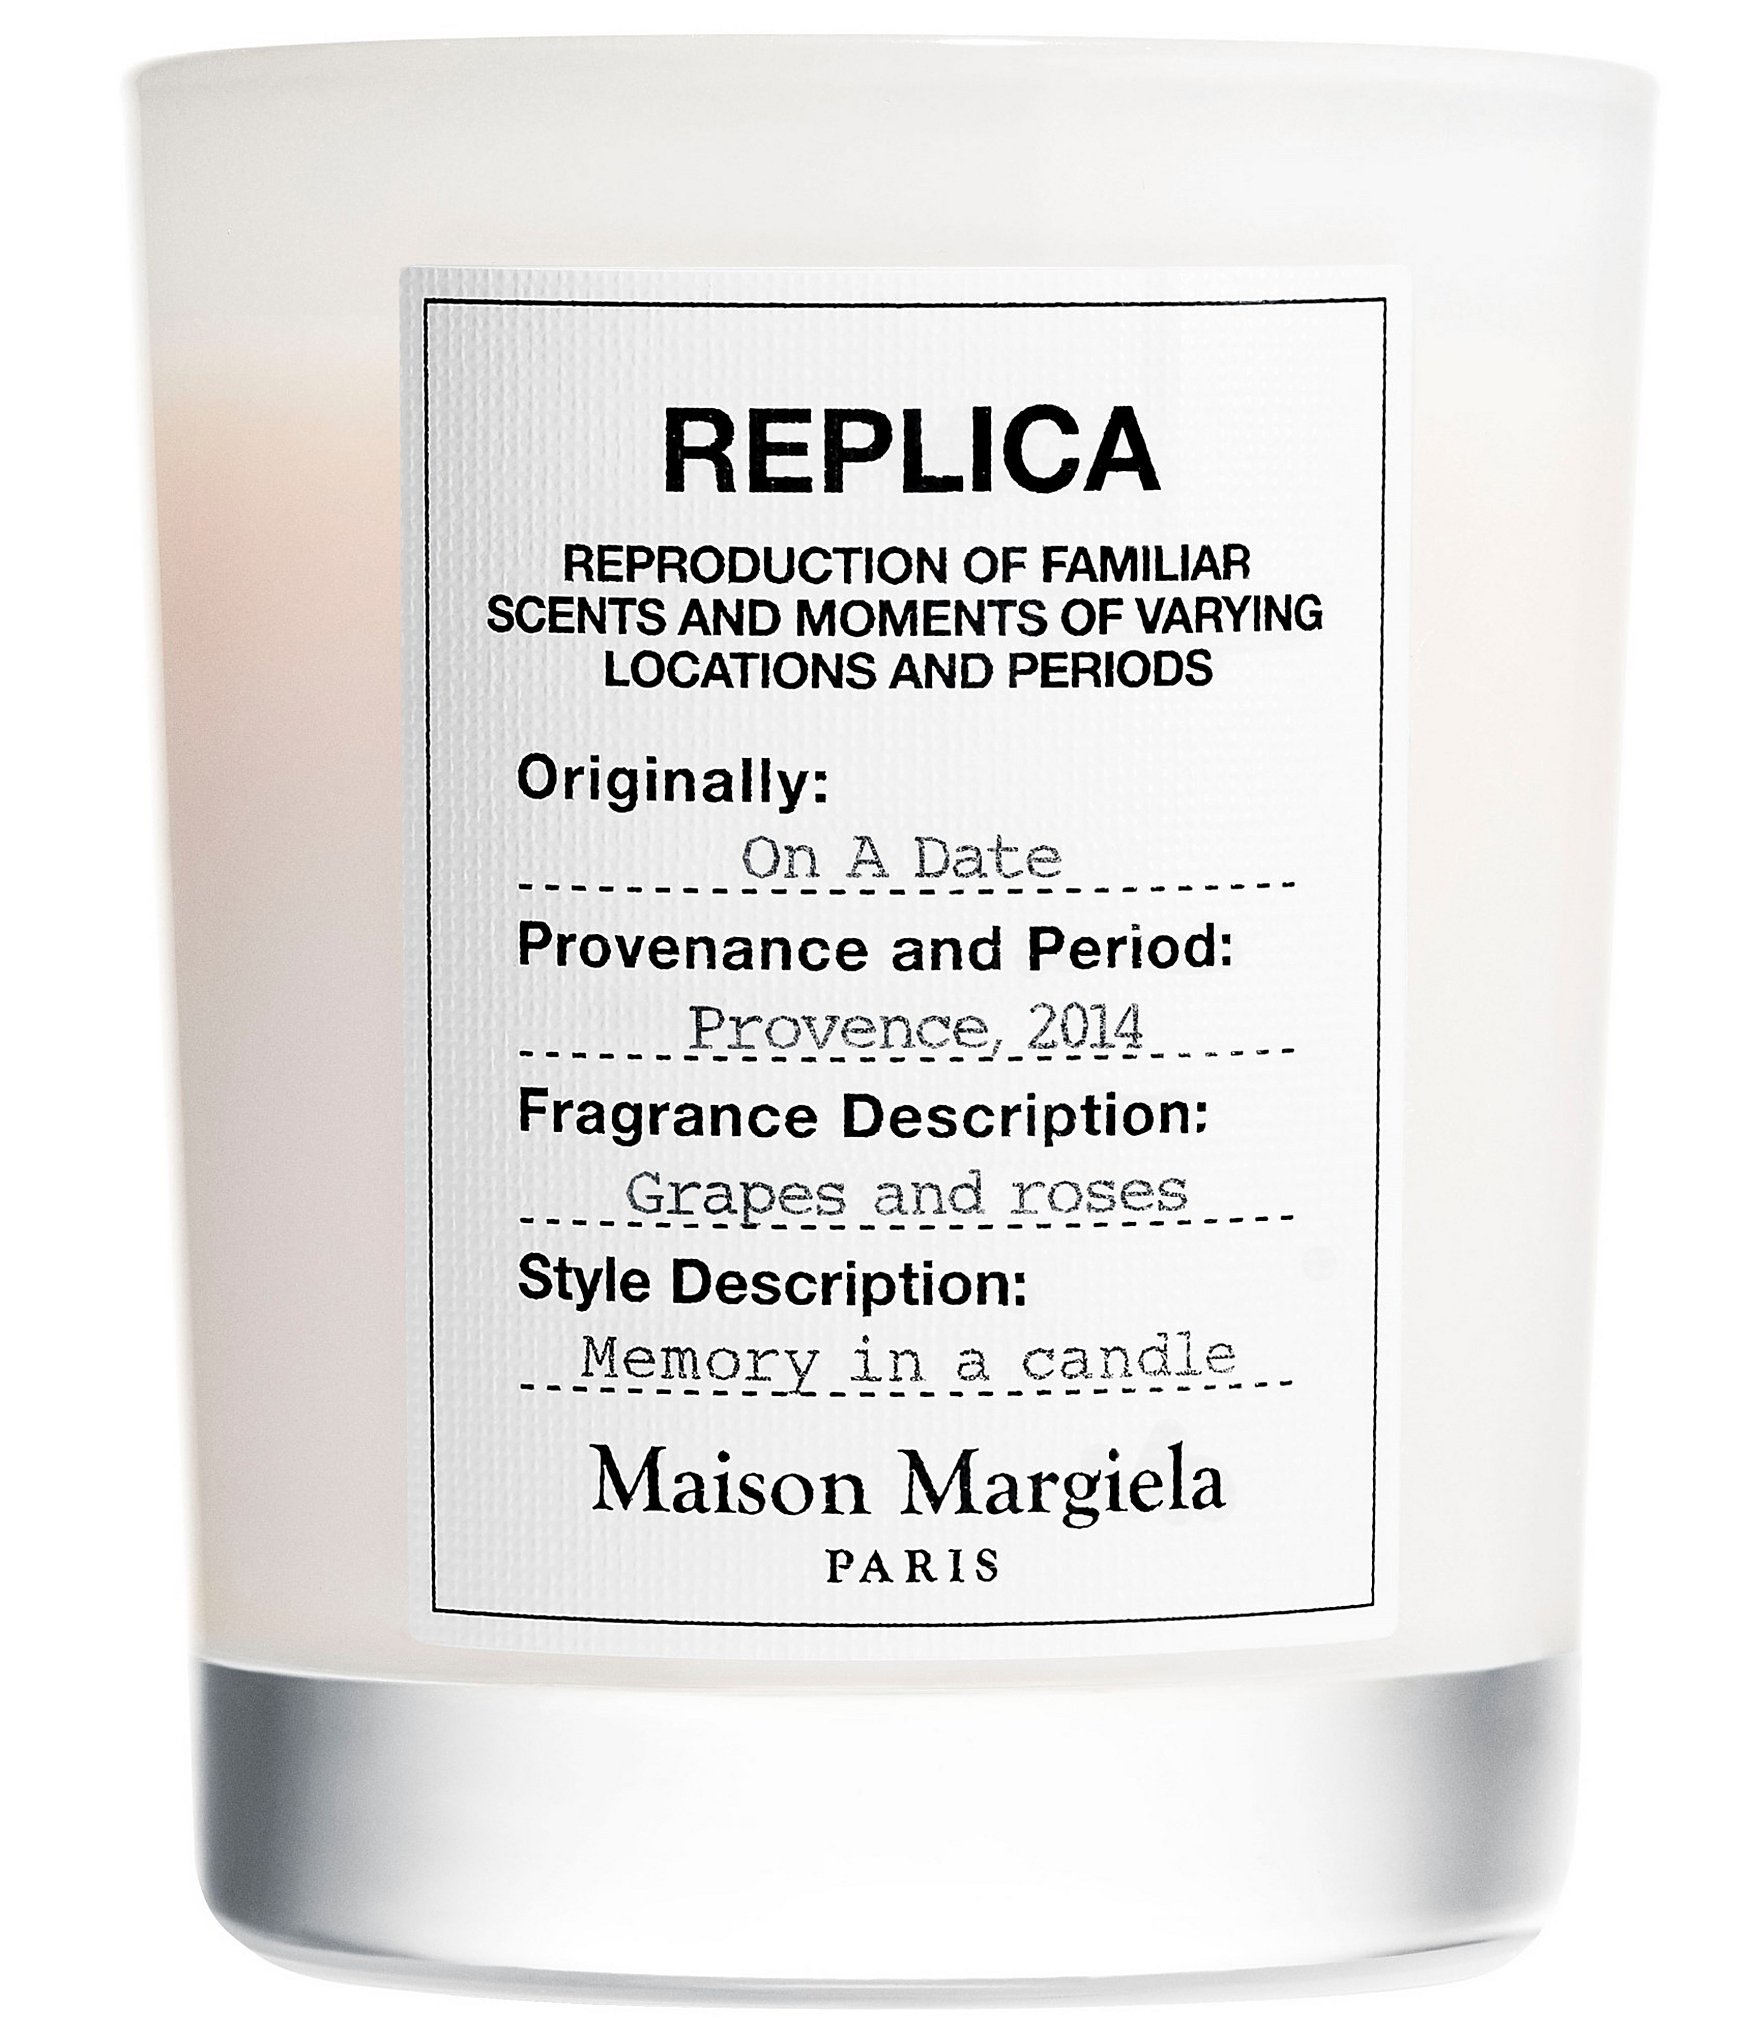 Maison Margiela REPLICA By the Fireplace Scented Candle, 5.8-oz., Dillard's